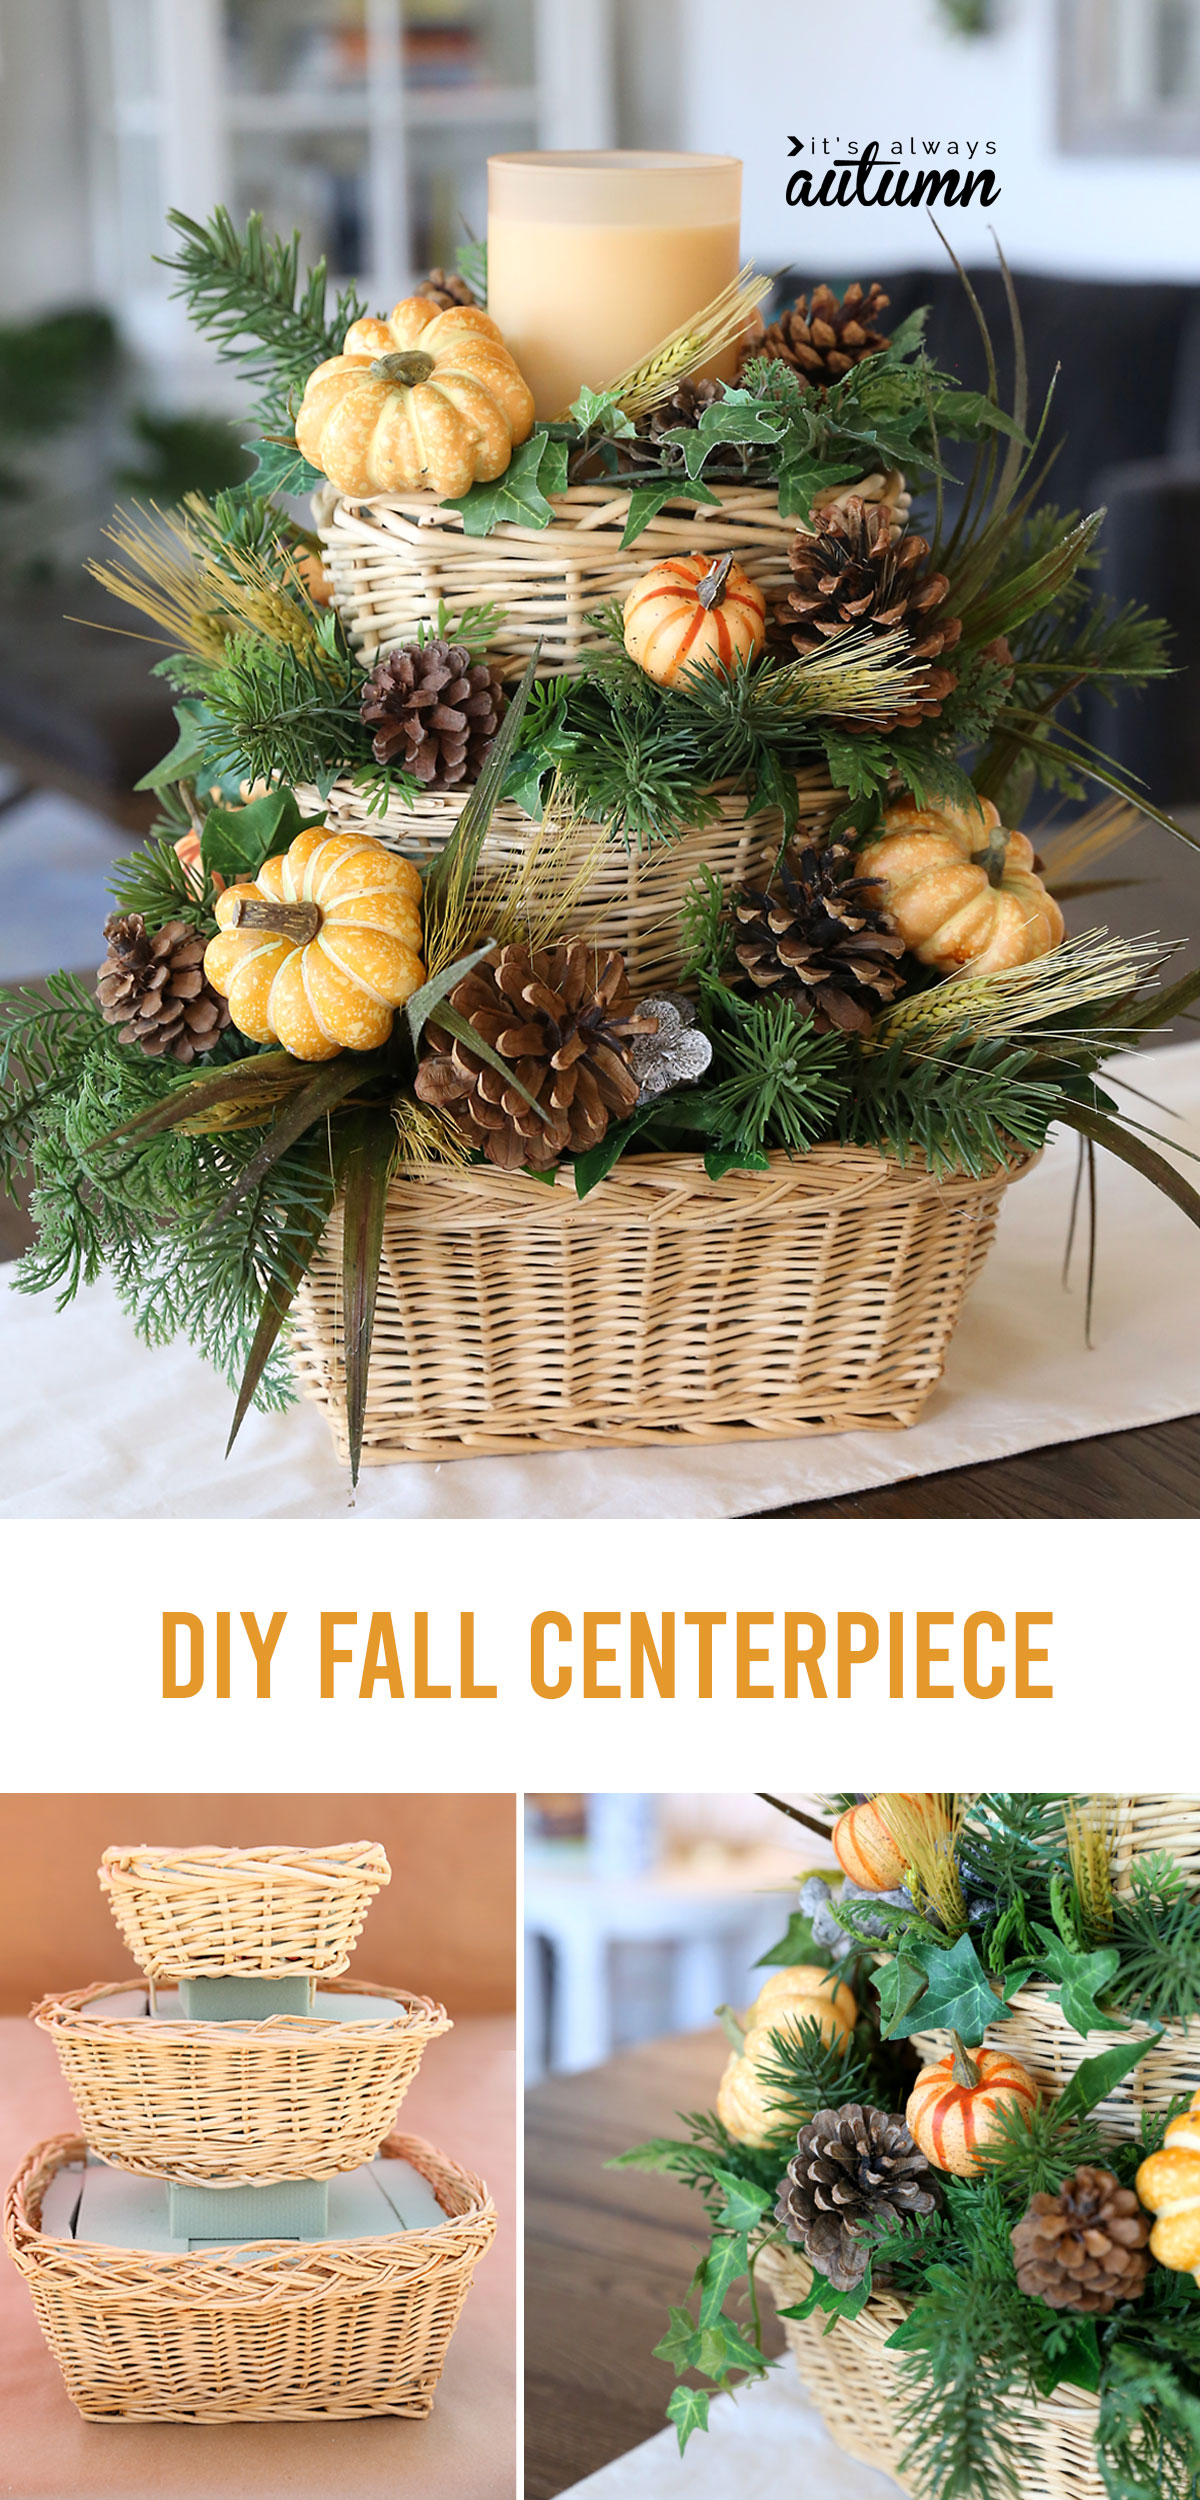 This beautiful DIY fall centerpiece can be made with items from the thrift store for about $25!